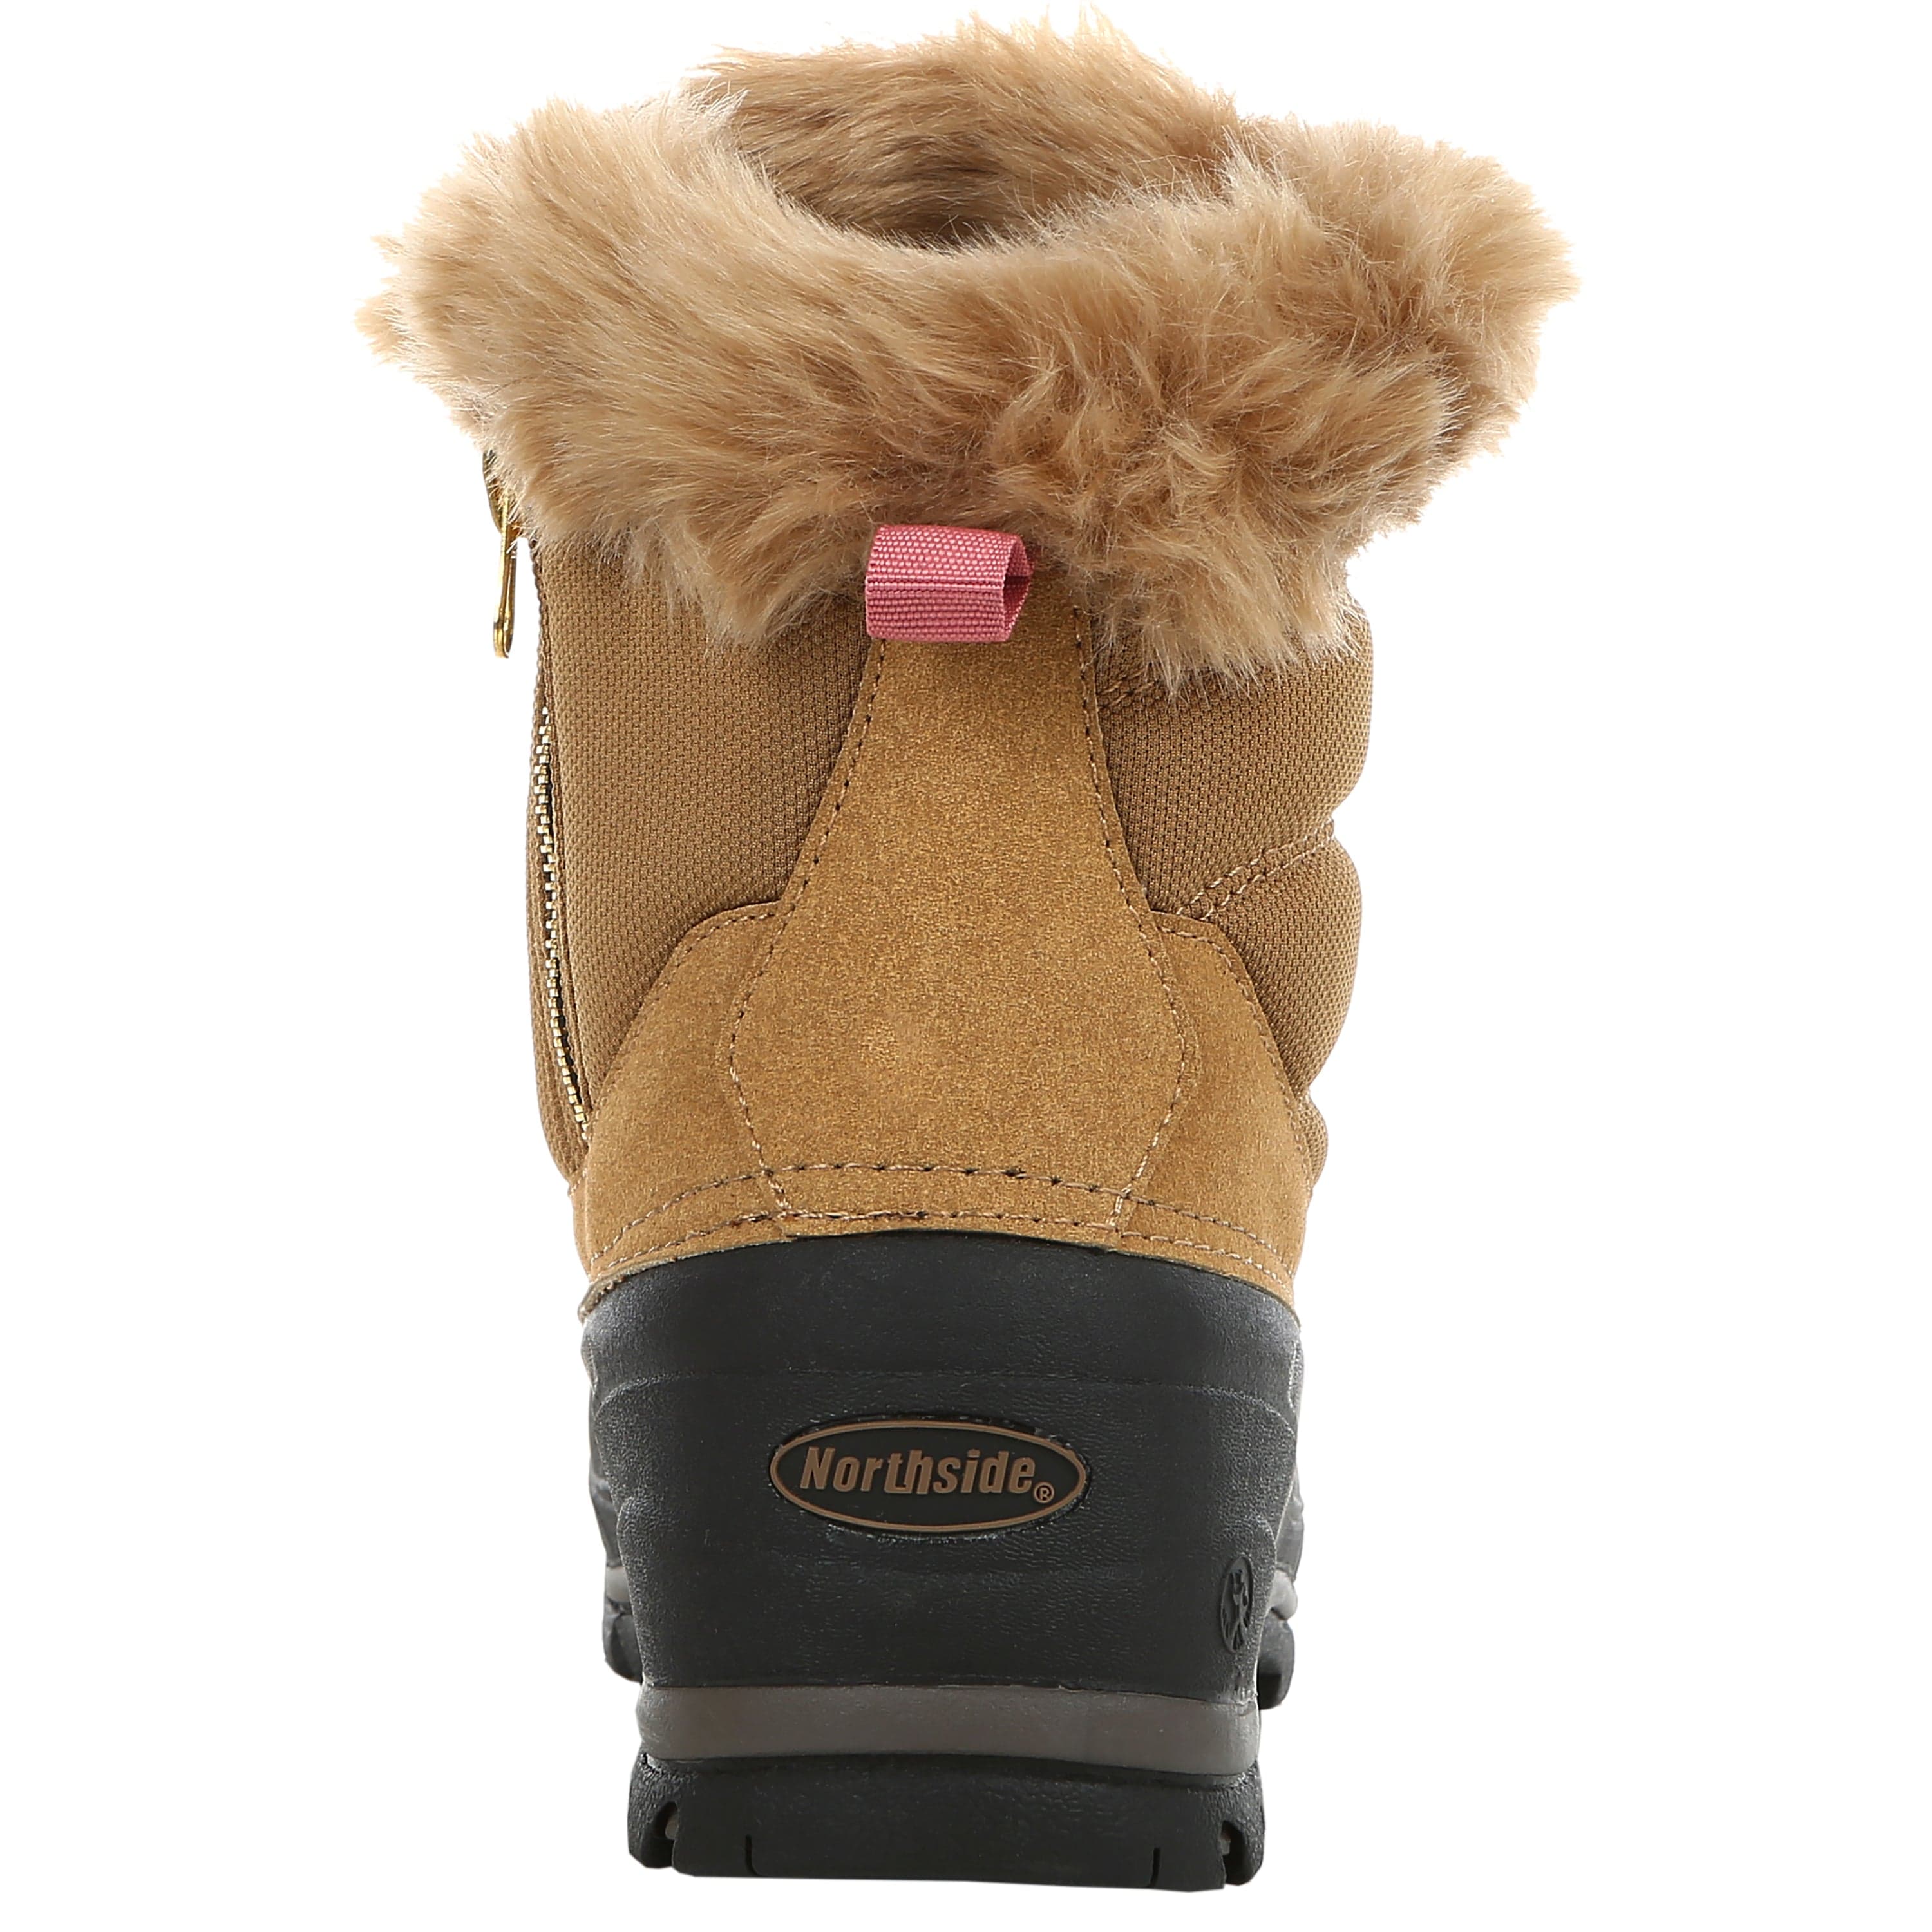 Women's Shiloh Insulated Winter Snow Boot - Northside USA